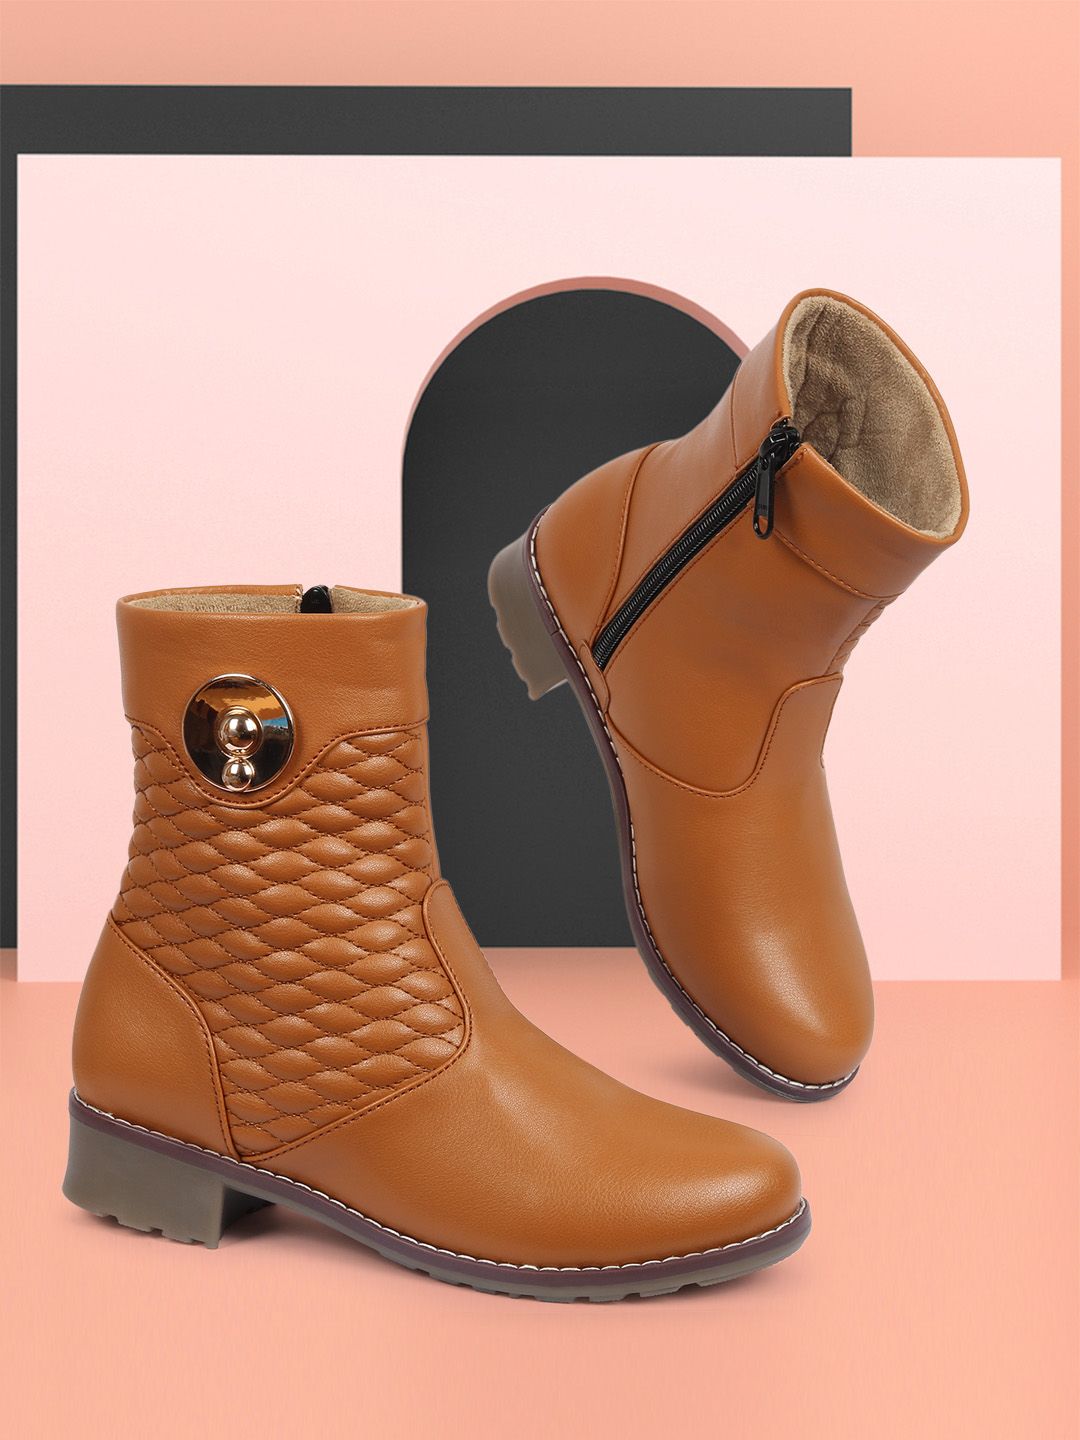 Alishtezia Tan Textured PU Block Heeled Boots with Buckles Price in India